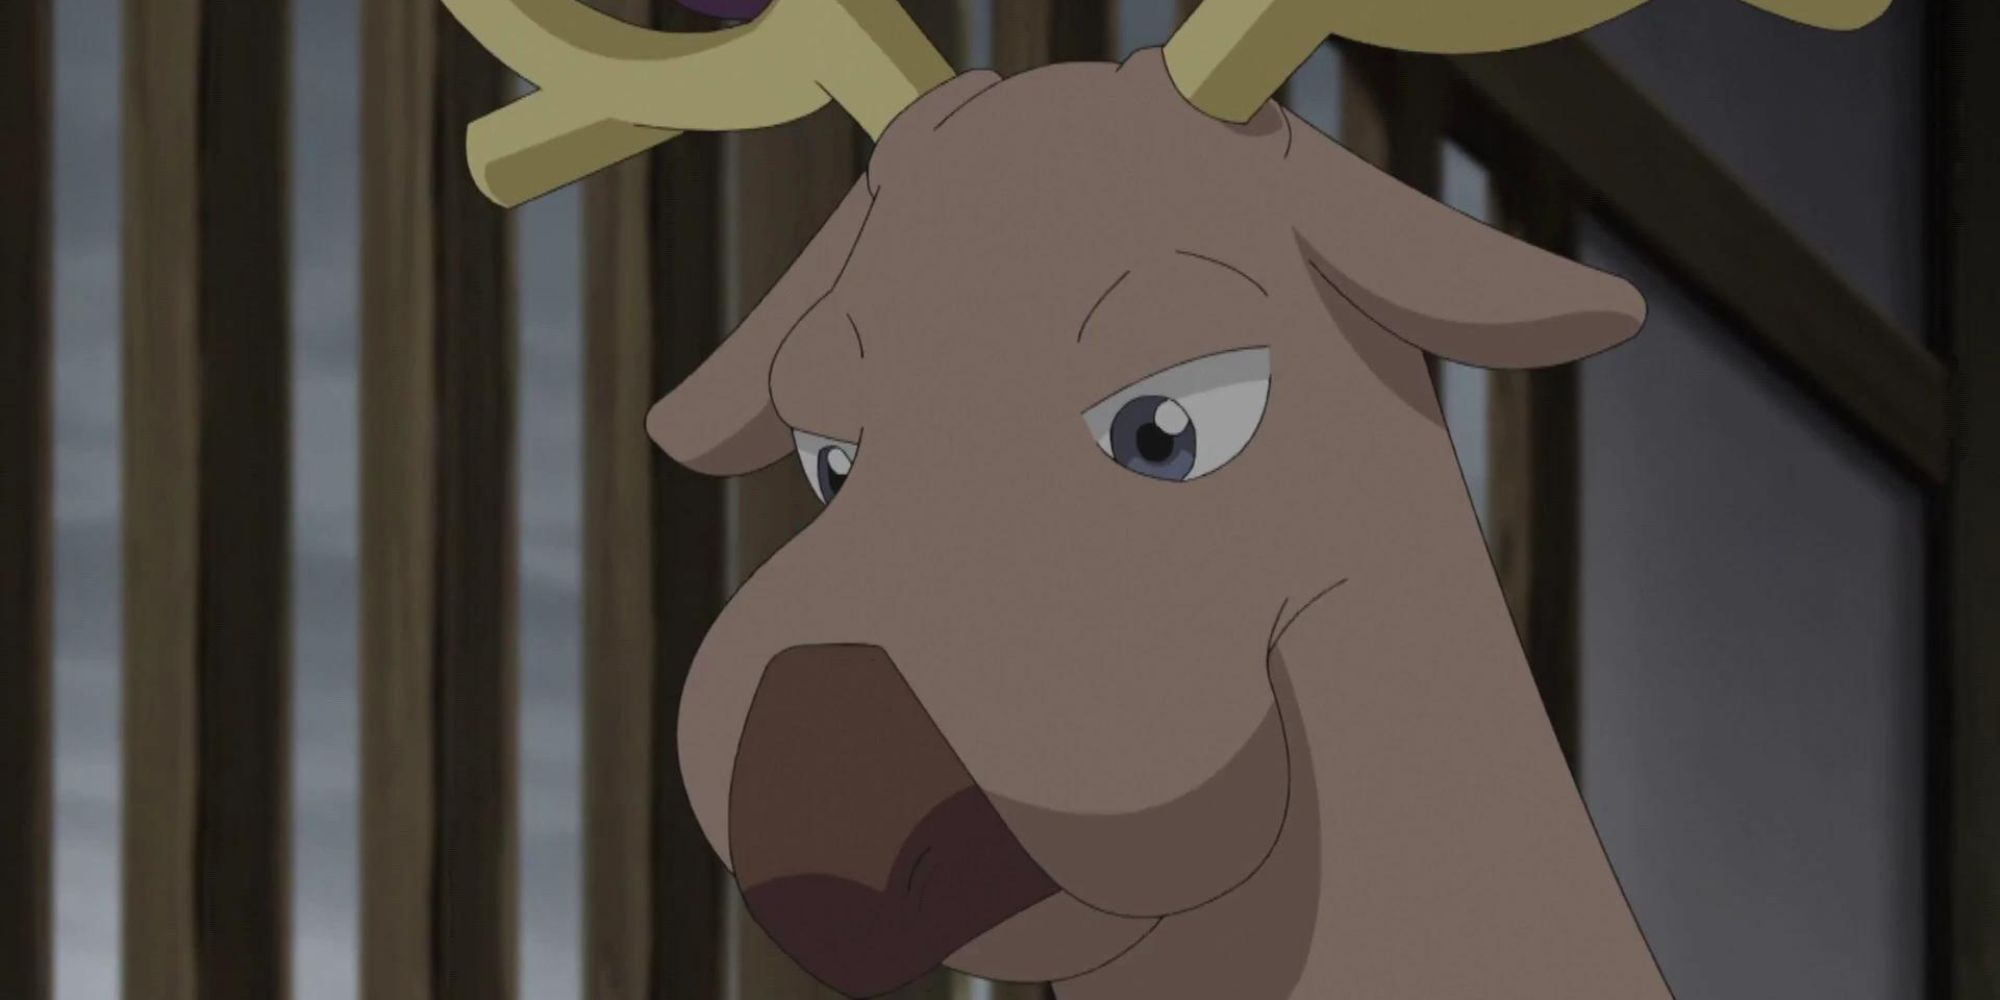 Stantler looks down while standing in a dark room